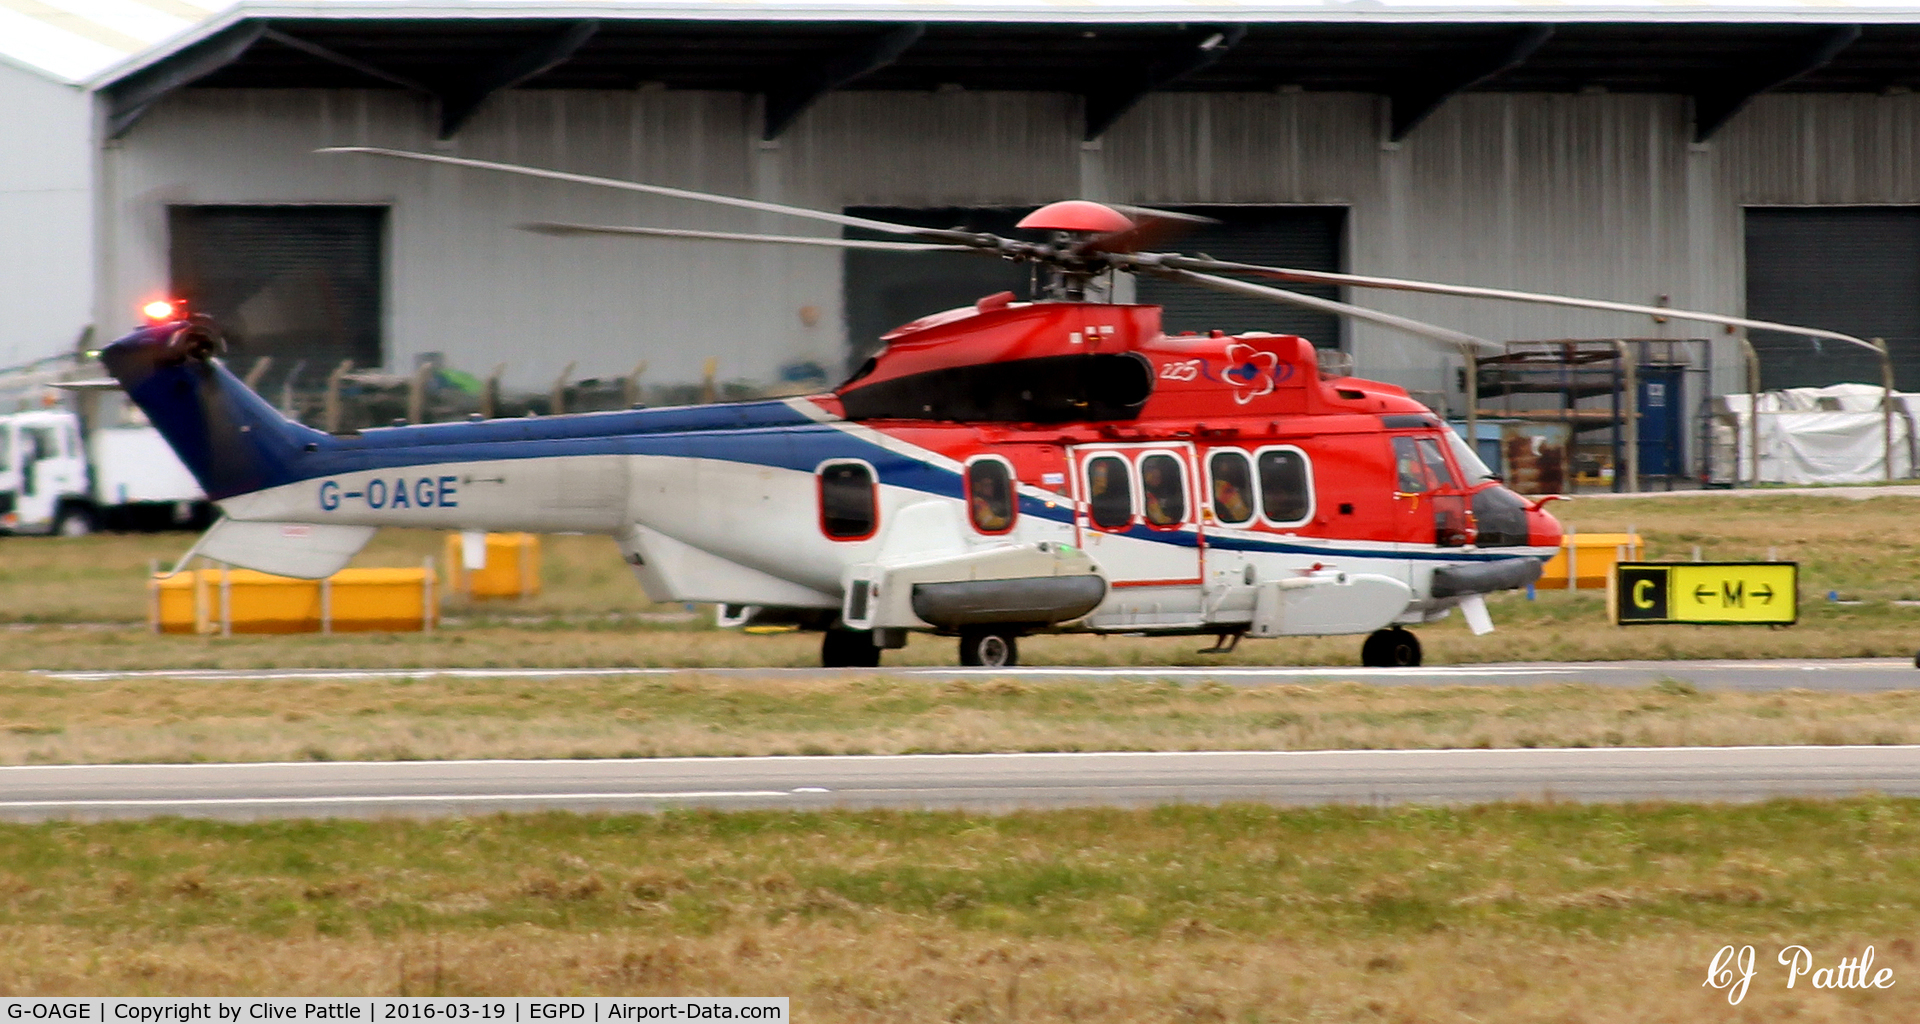 G-OAGE, 2014 Airbus Helicopters EC-225LP Super Puma Mk2+ C/N 2949, Taxy in at Aberdeen EGPD